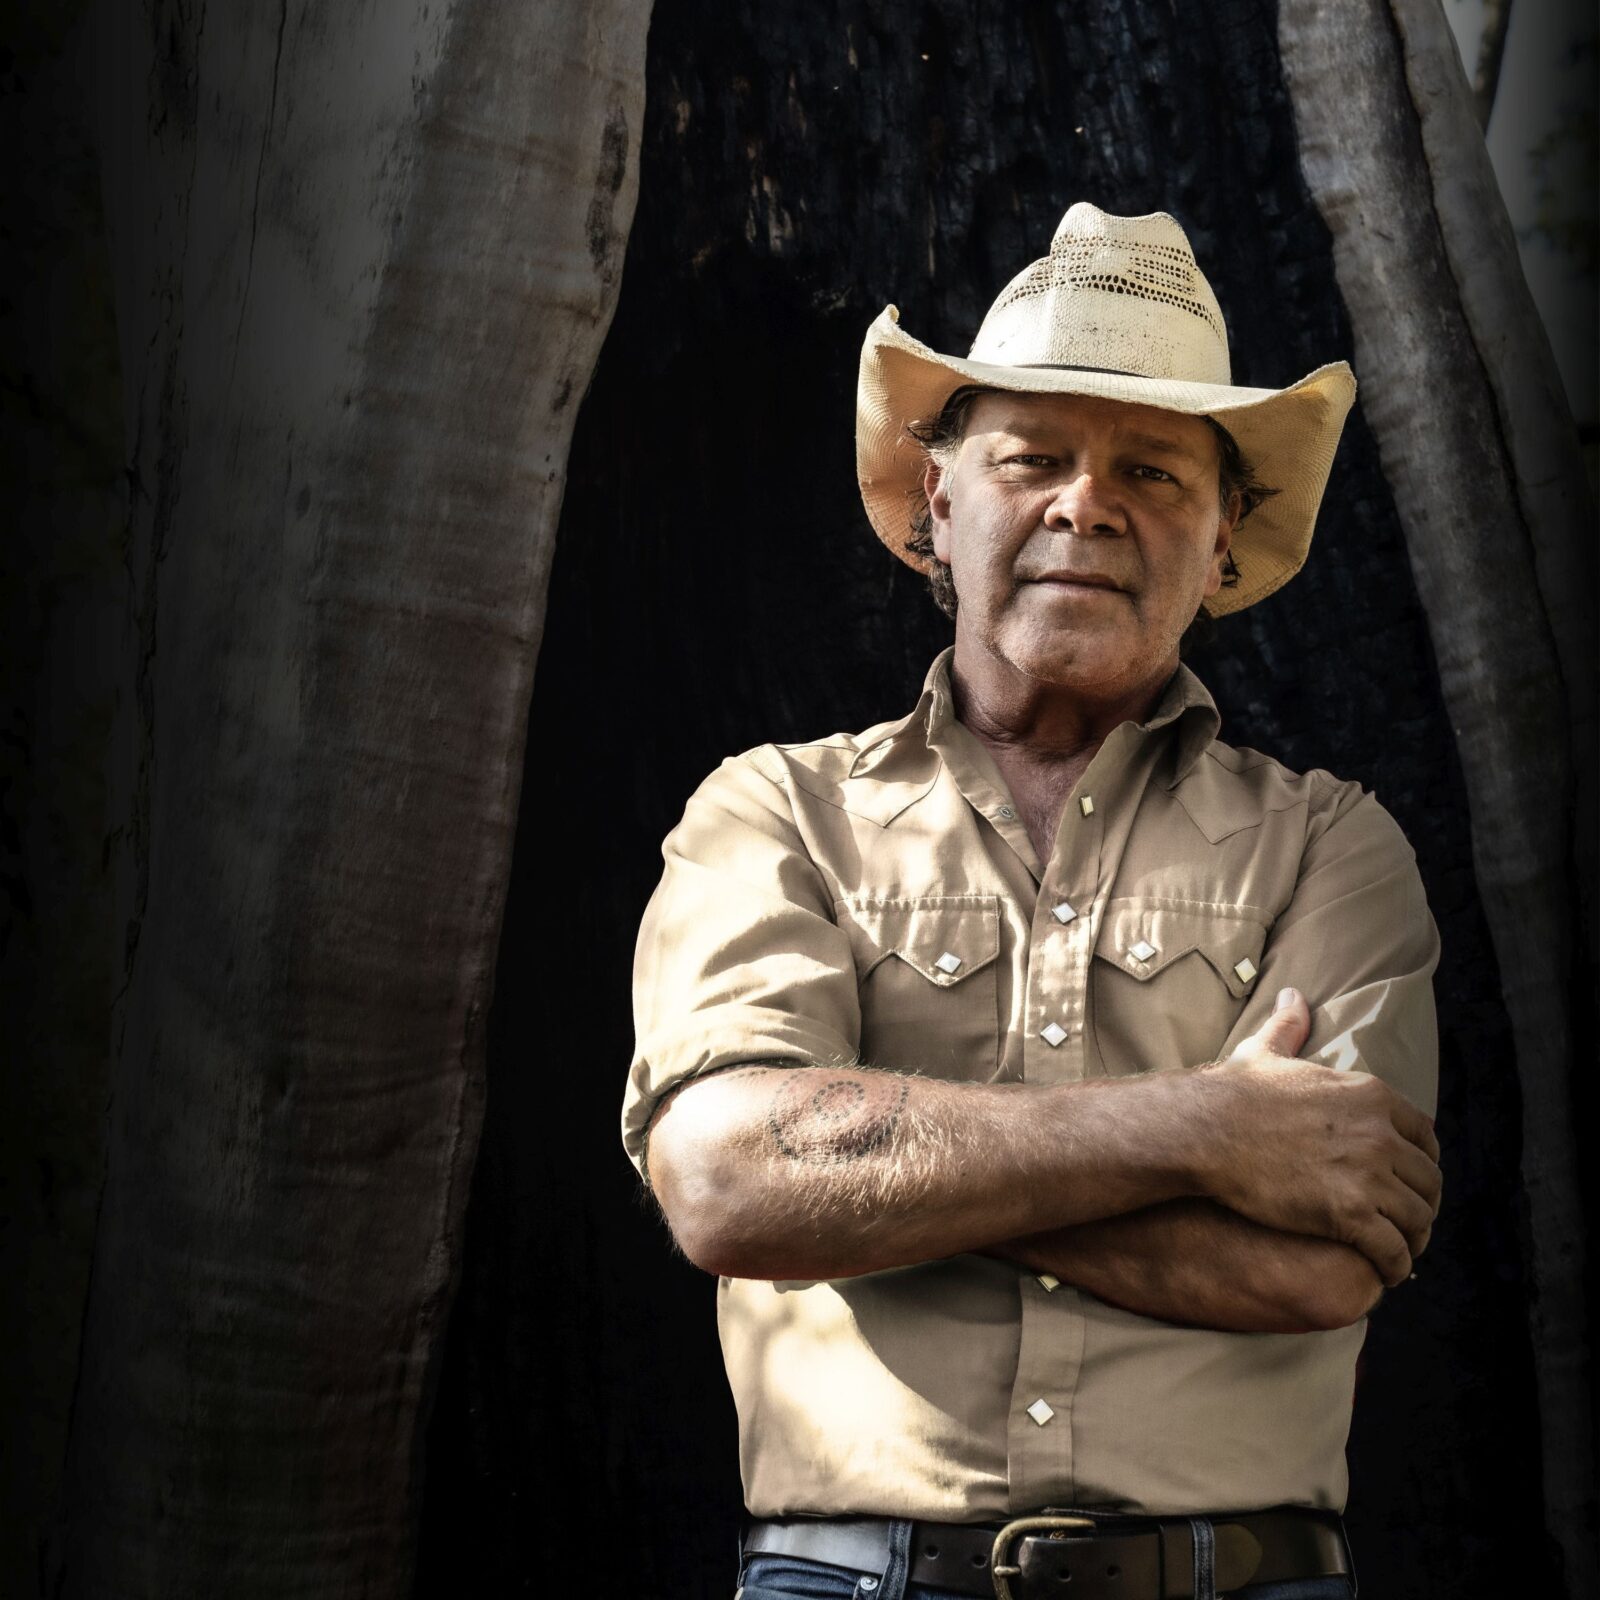 Image of Troy Cassar-Daley in a cowboy hat with arms crossed